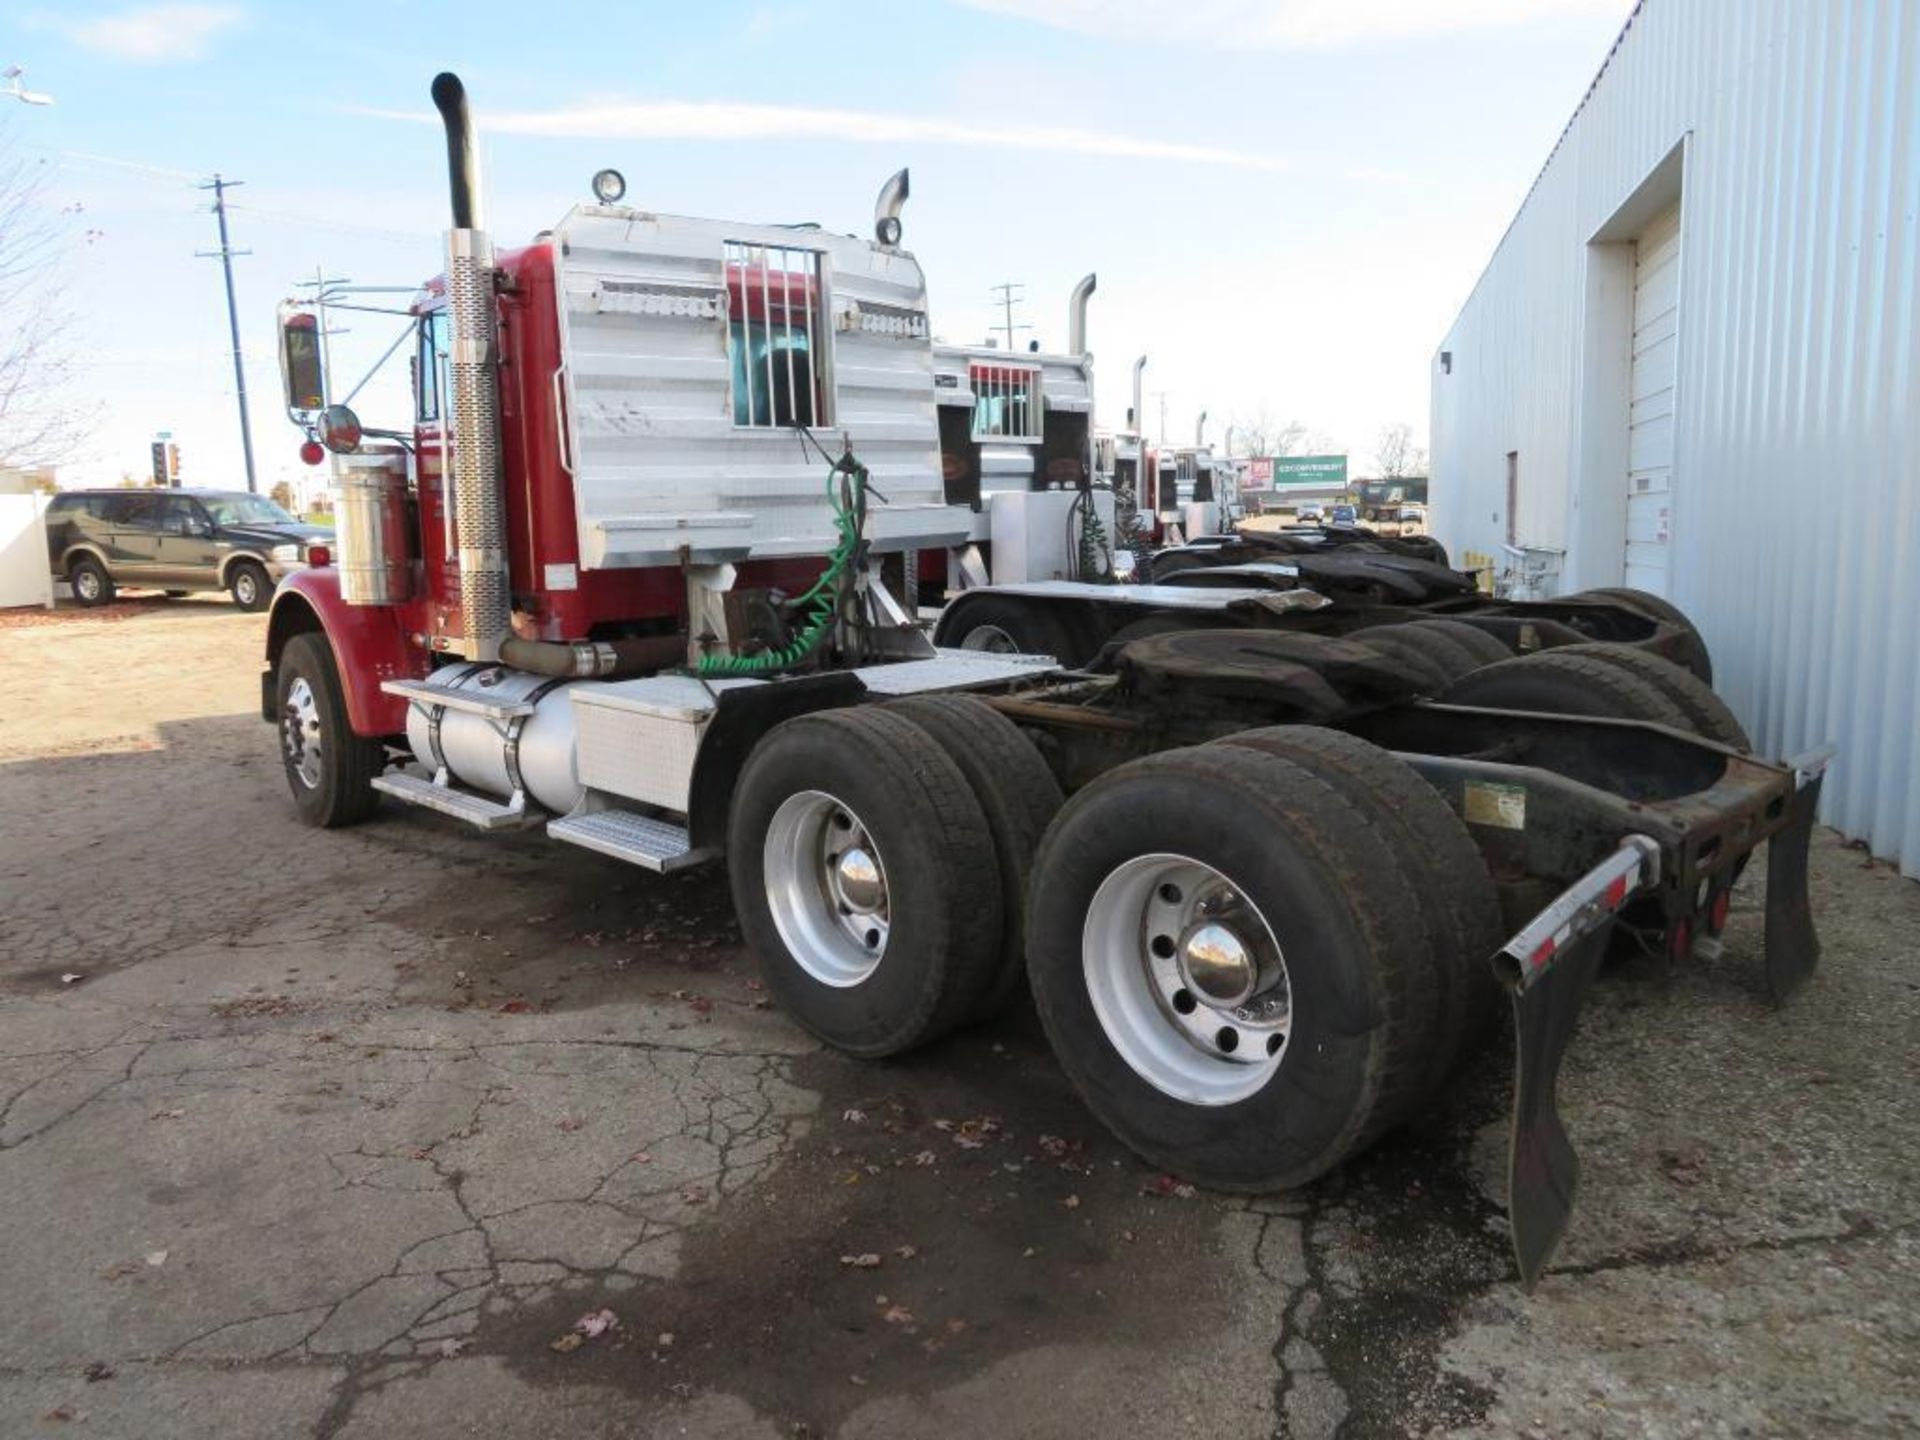 2008 Freightliner Classic Conventional Tandem-Axle Truck Tractor, VIN 1FUJE6LK58DY56488, Fuller Manu - Image 3 of 8